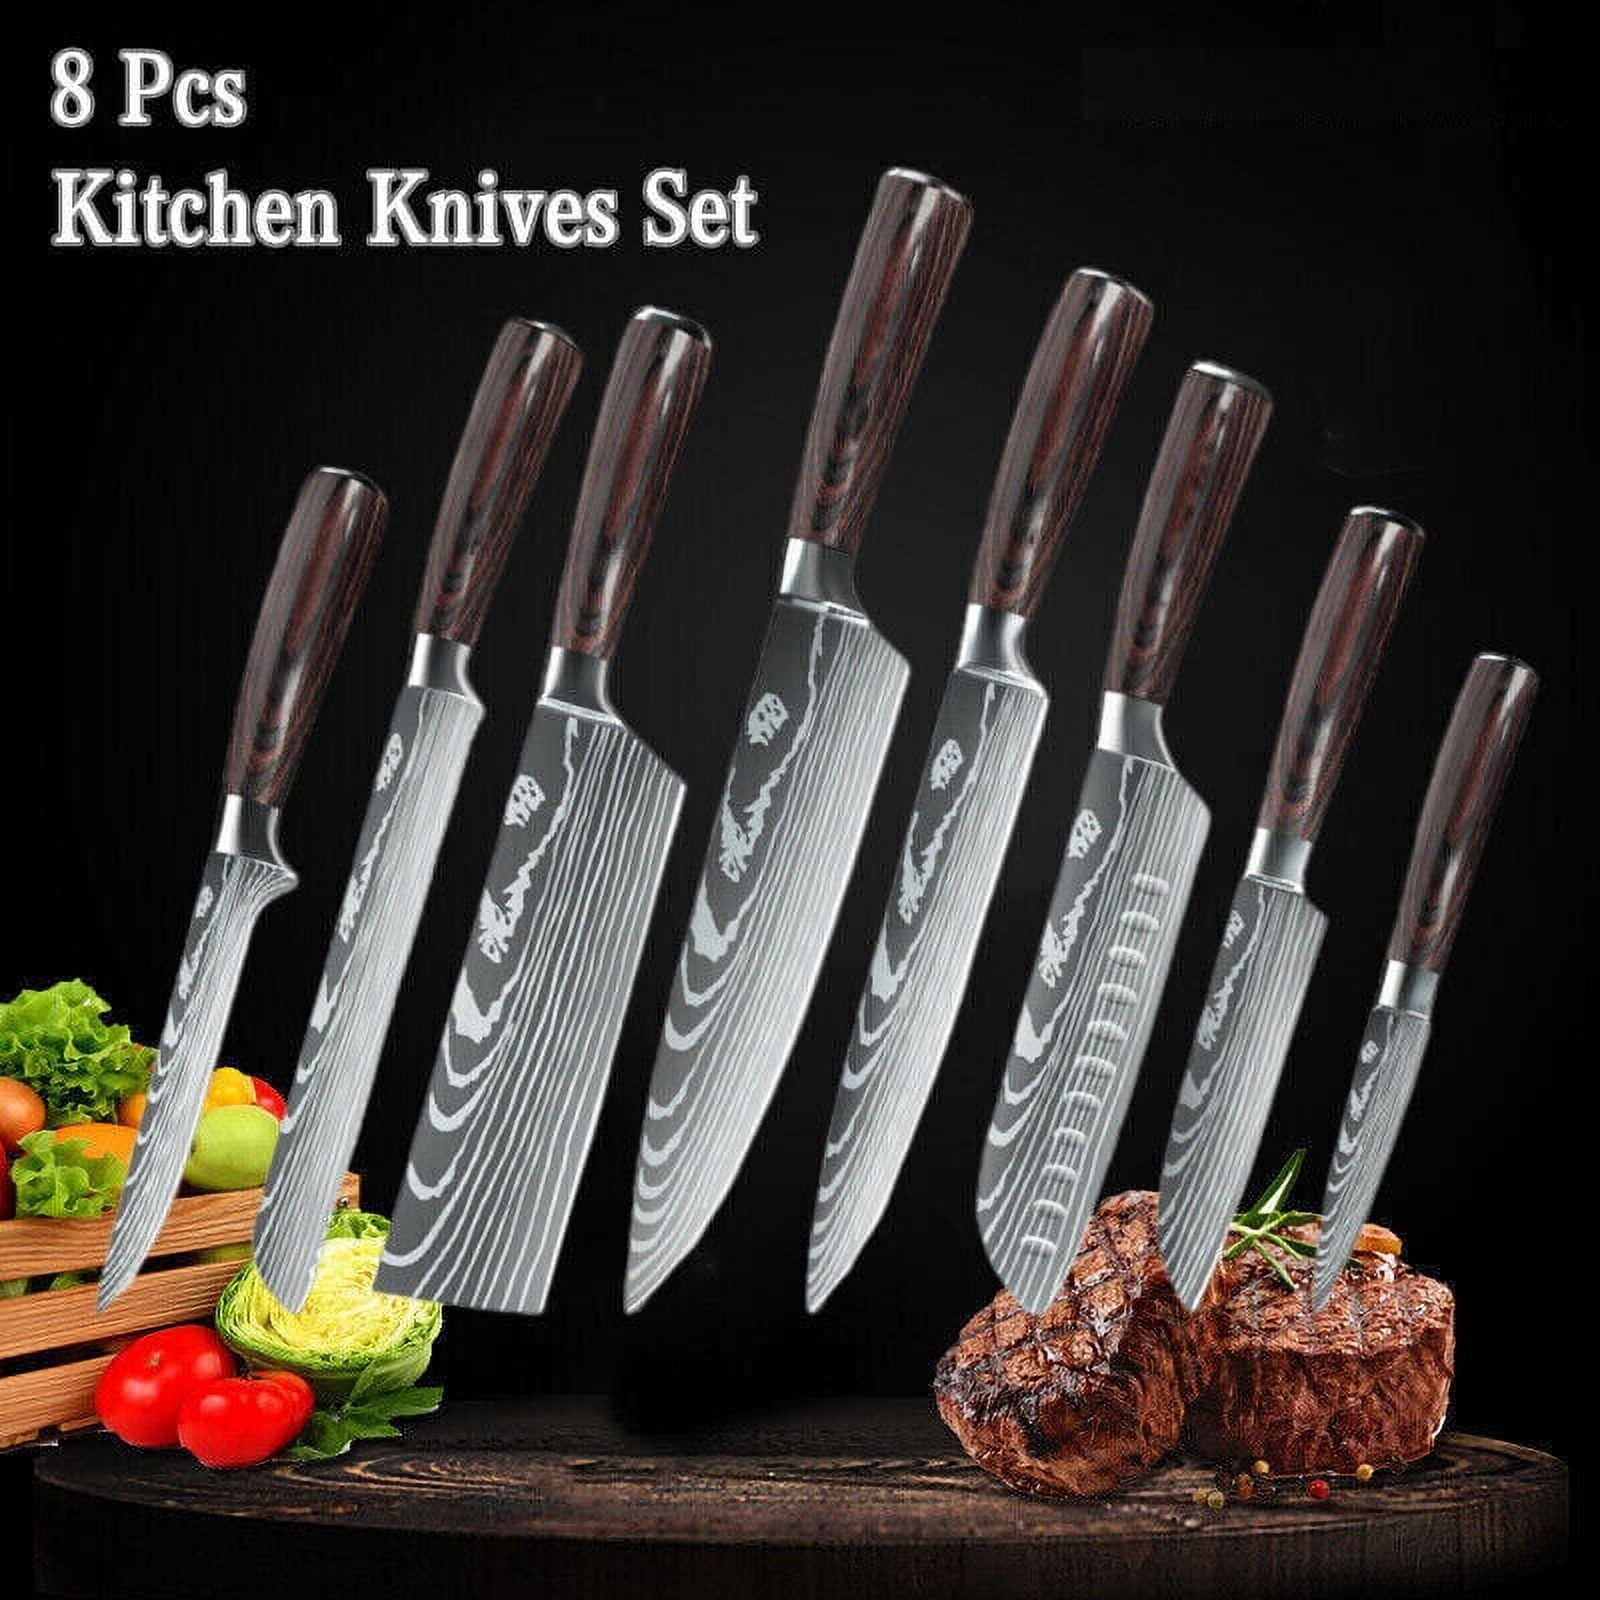 MONGSEW 2 Pcs Kitchen Knife, Stainless Steel Chef Knife Set, Includes 8  inch Chef knife, 4 inch Parring Knife and Two Matched Knife Sheath, Sharp